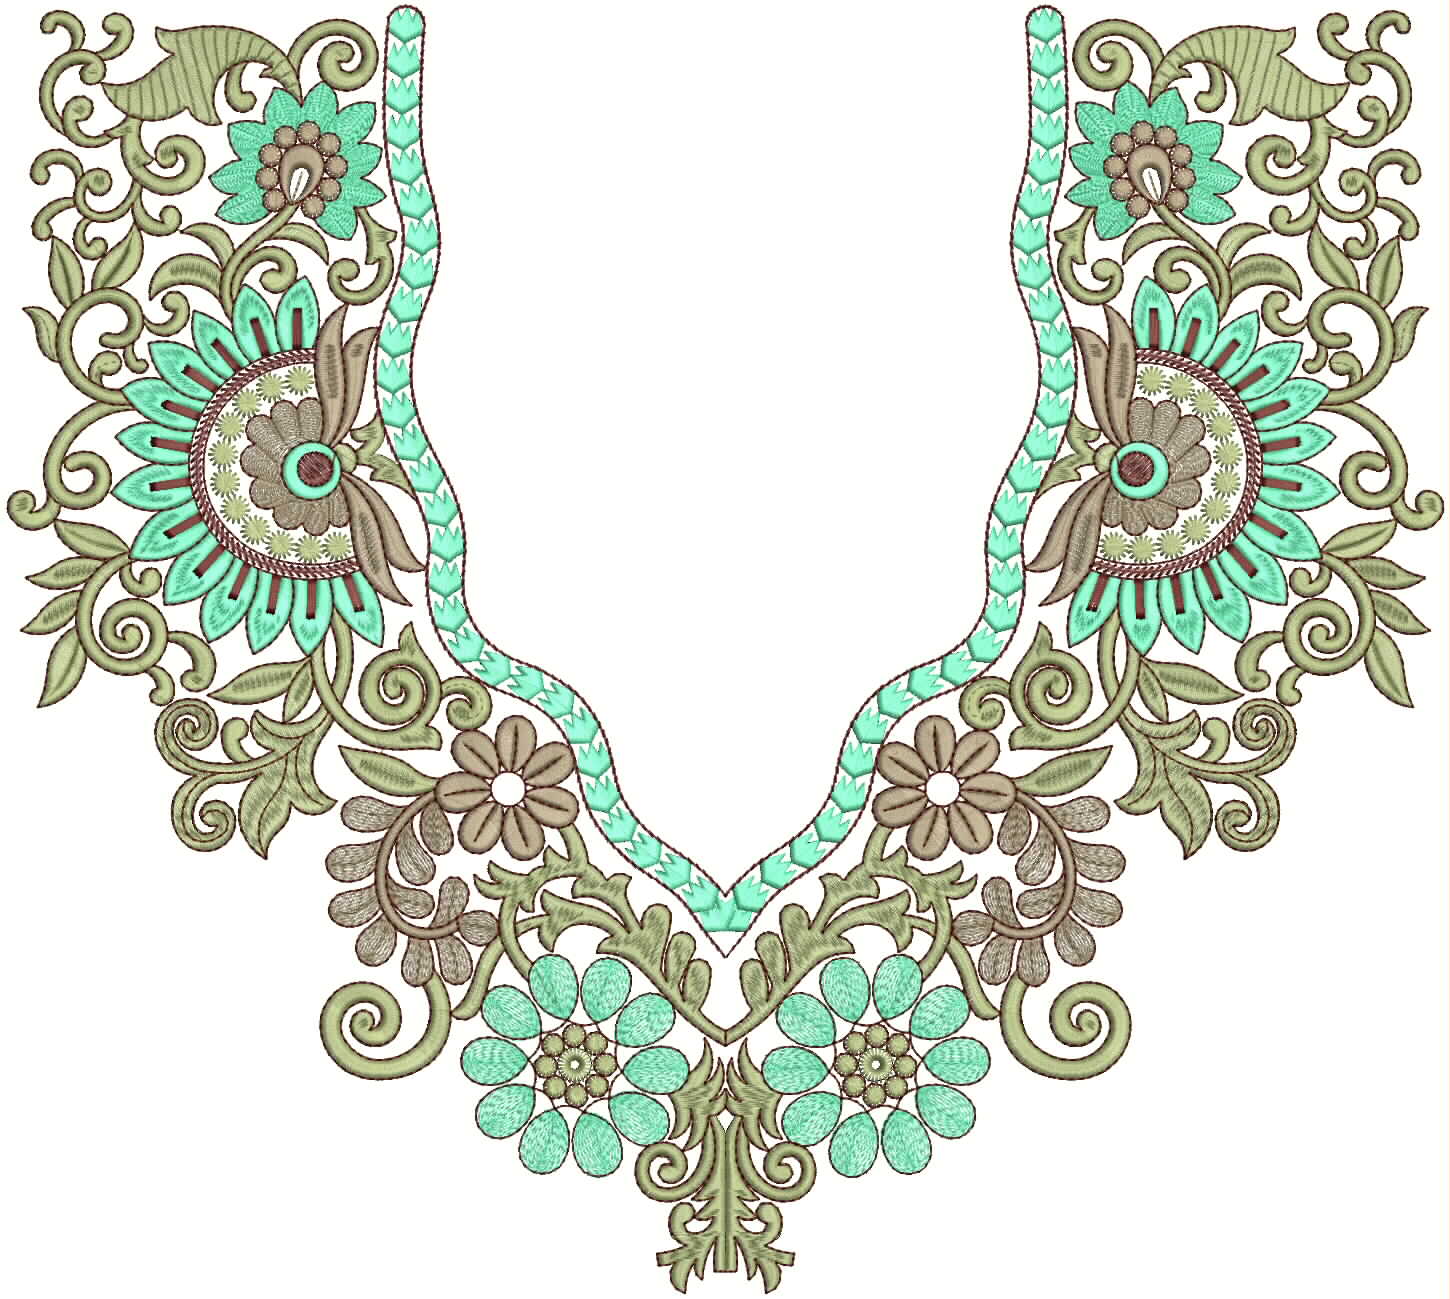 Embdesigntube: Hot Collection of Neck Embroidery Design